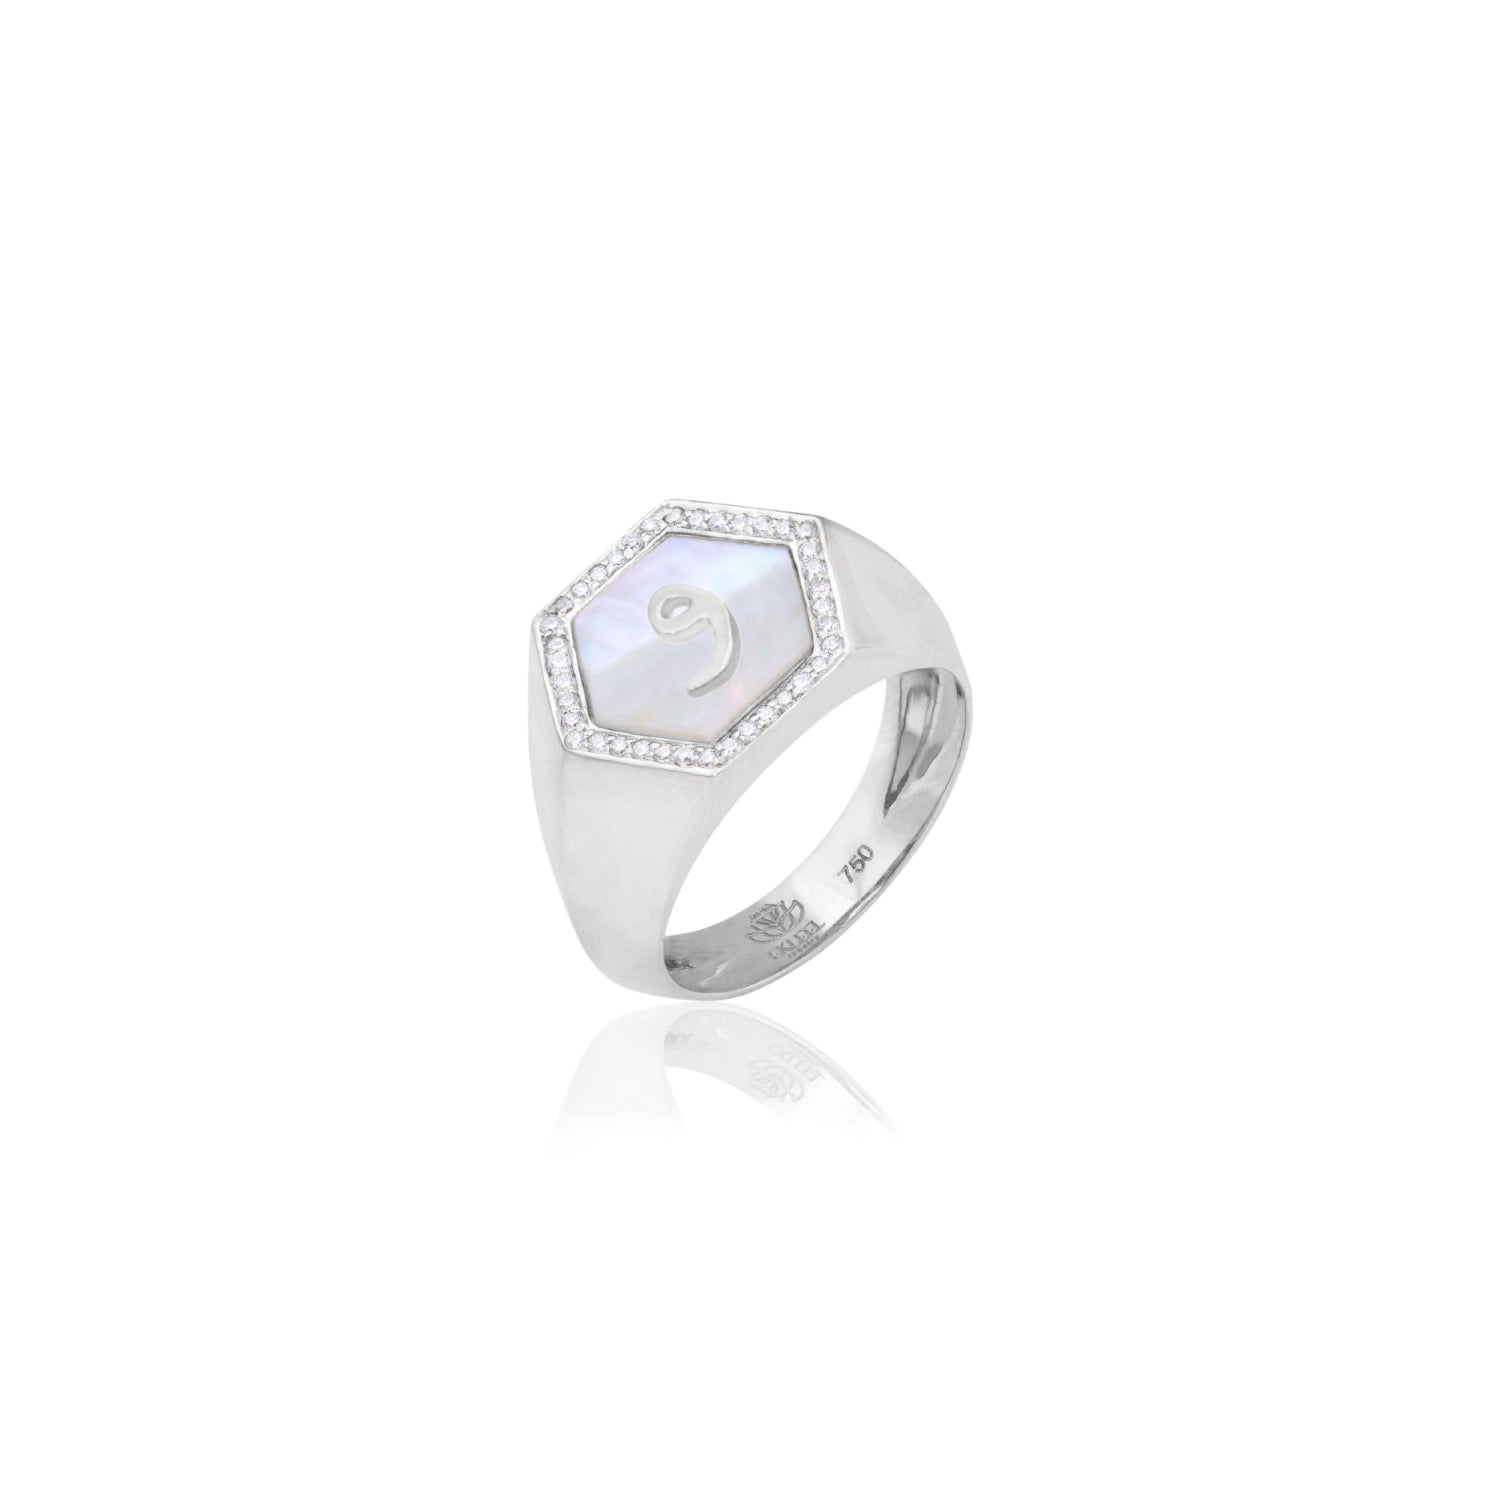 Qamoos 2.0 Letter و White Mother of Pearl and Diamond Signet Ring in White Gold